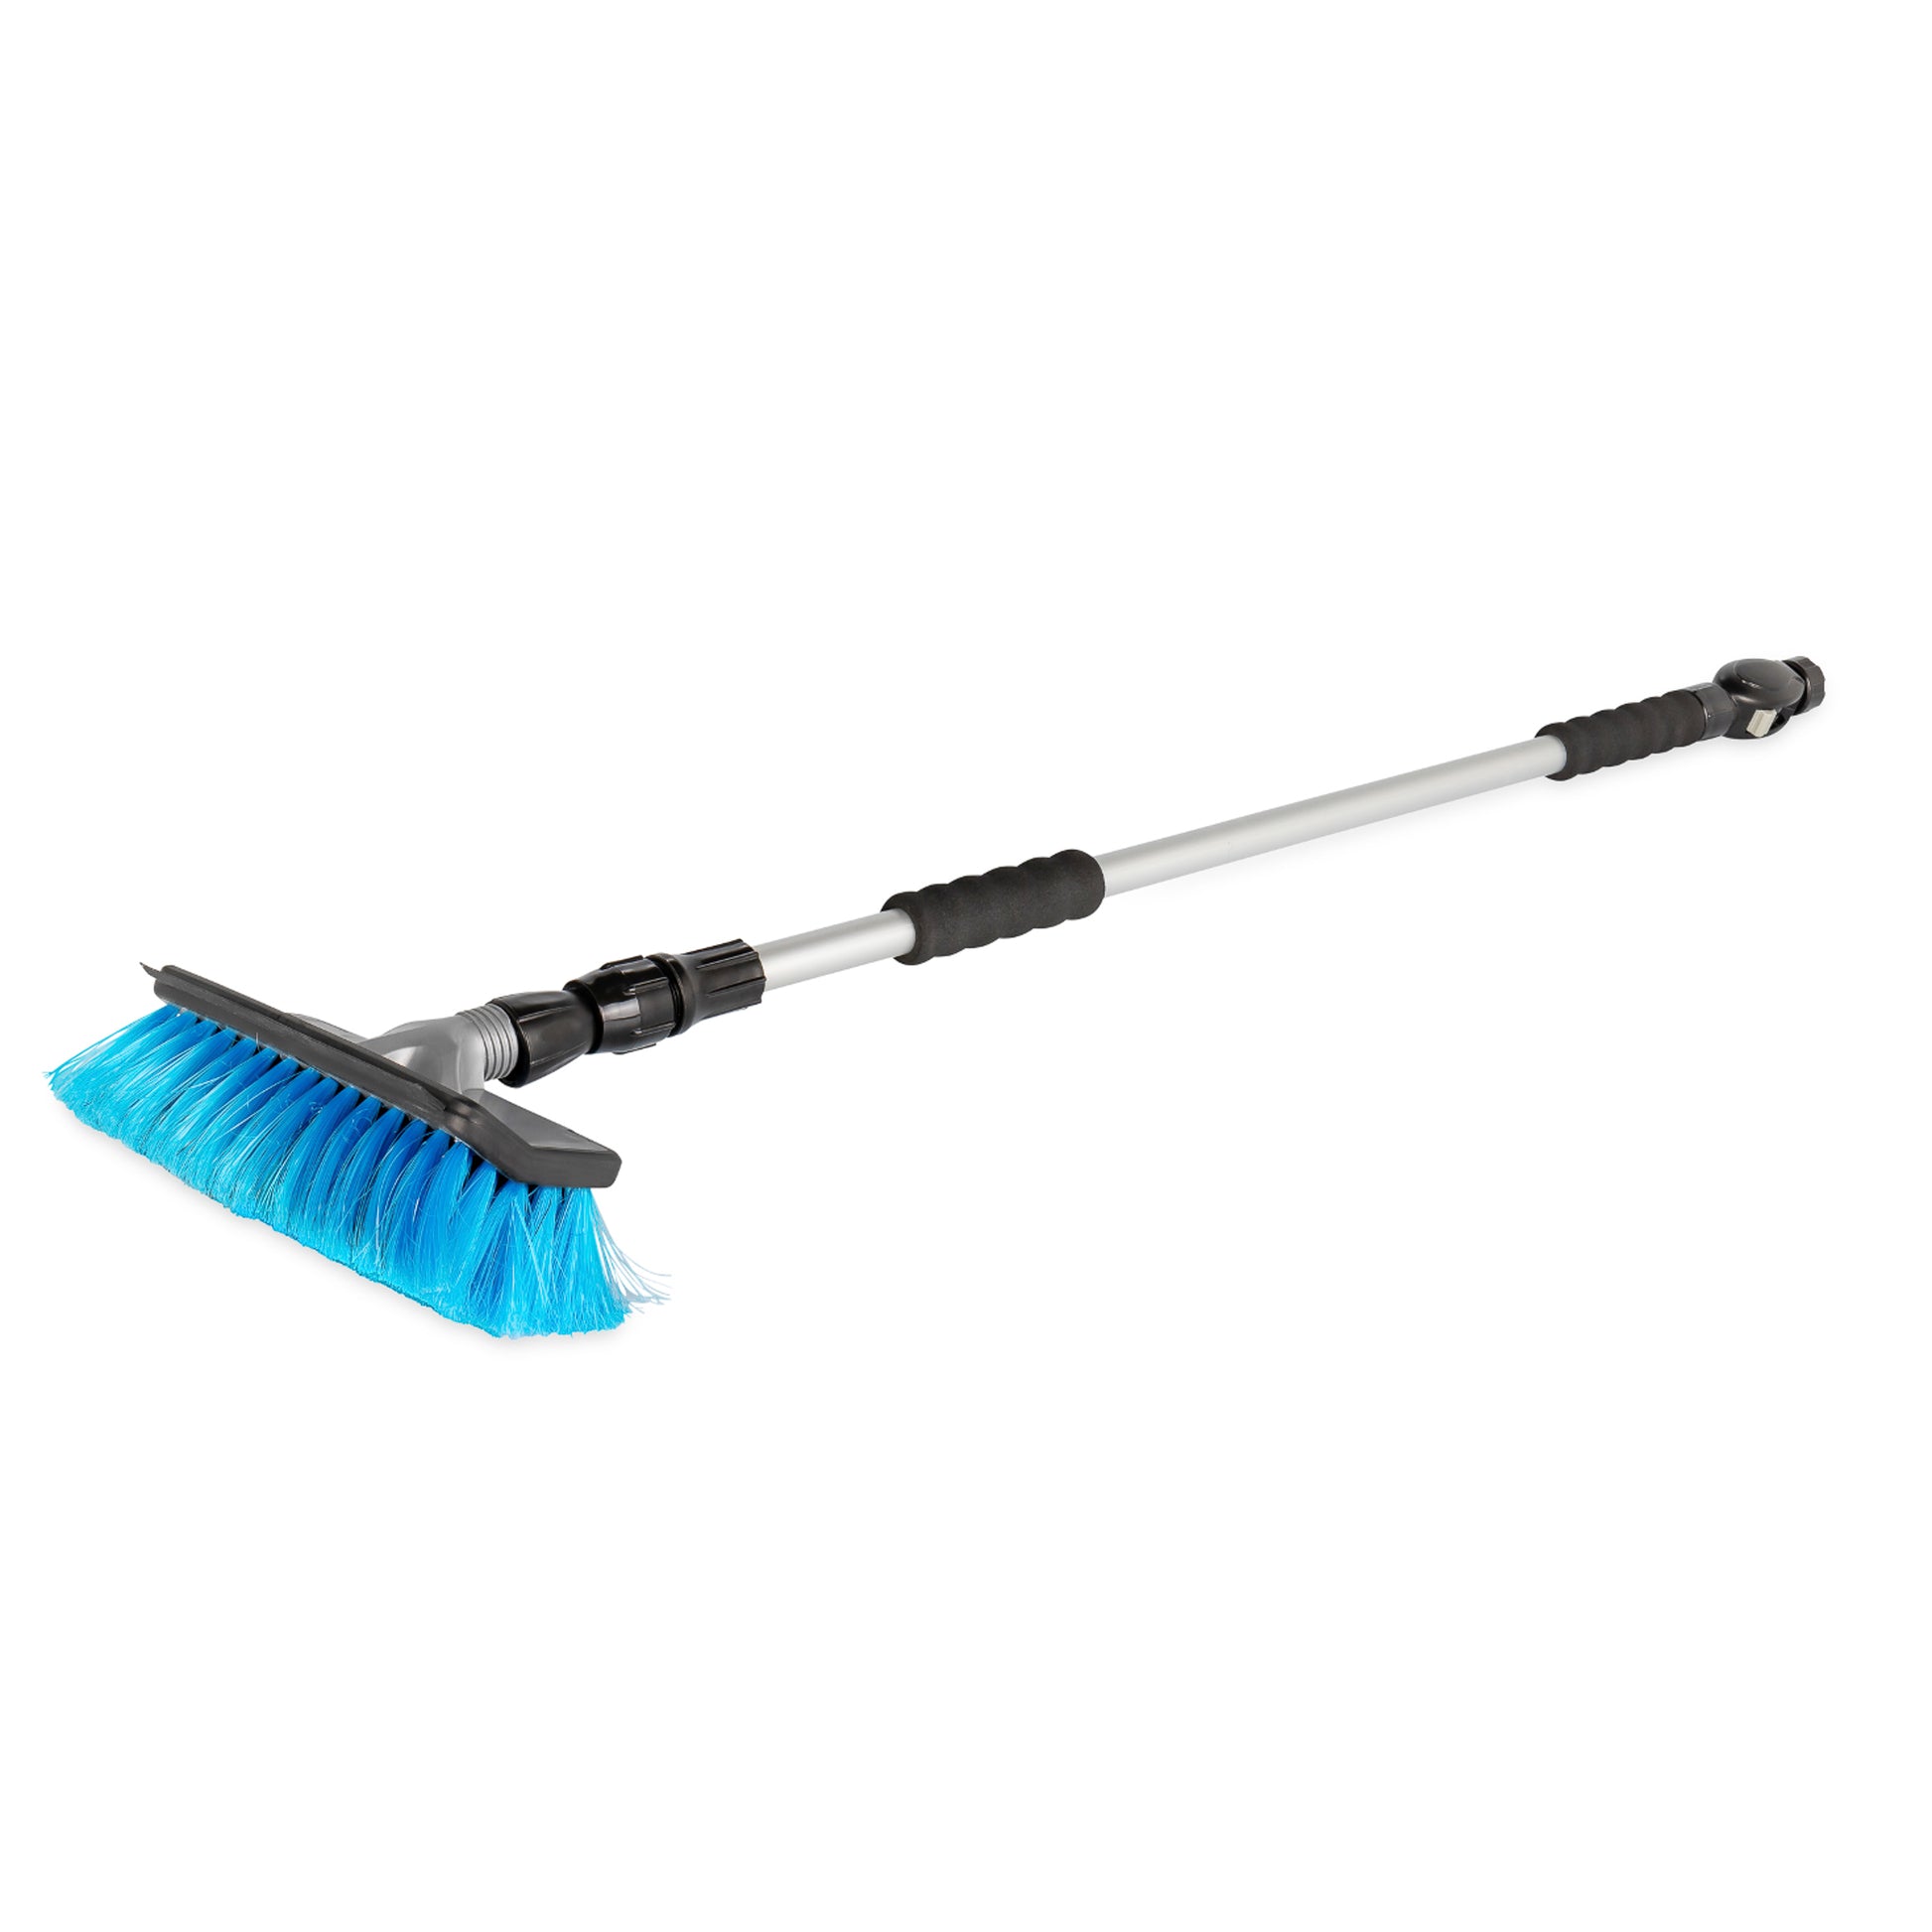 Camco Wash Brush with Adjustable Handle